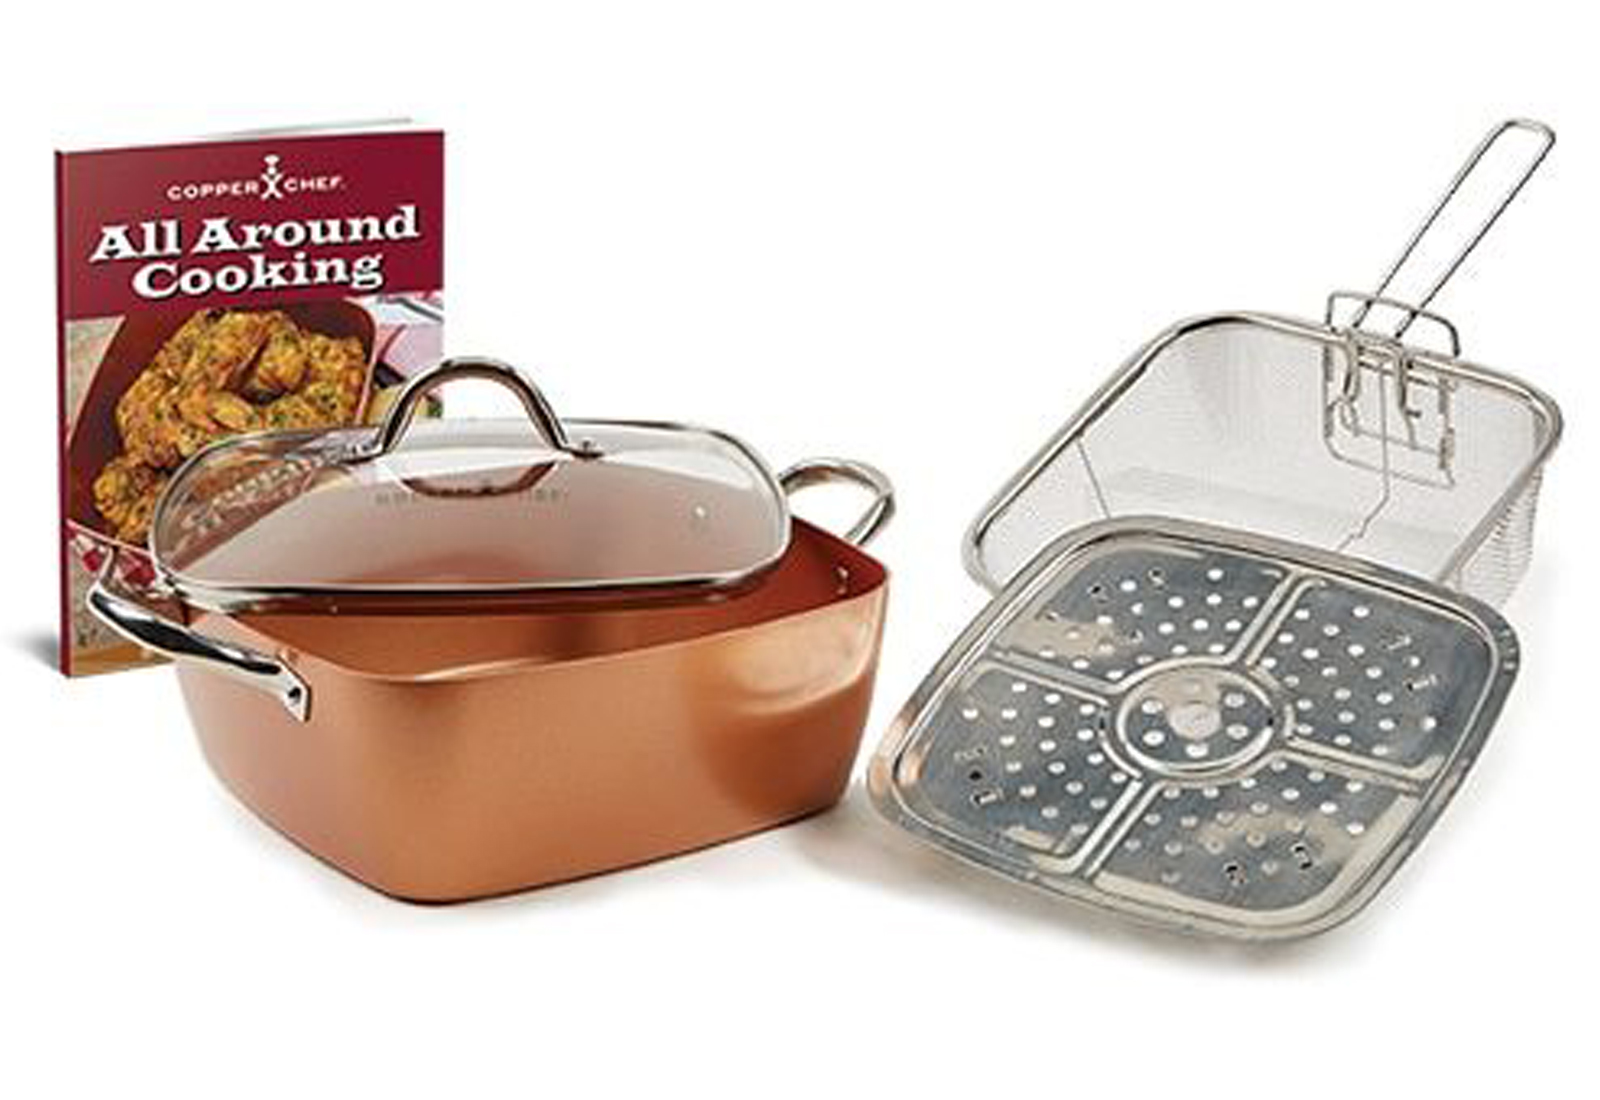 Copper Chef XL 11 In Casserole Pan 5PC Set Product Image